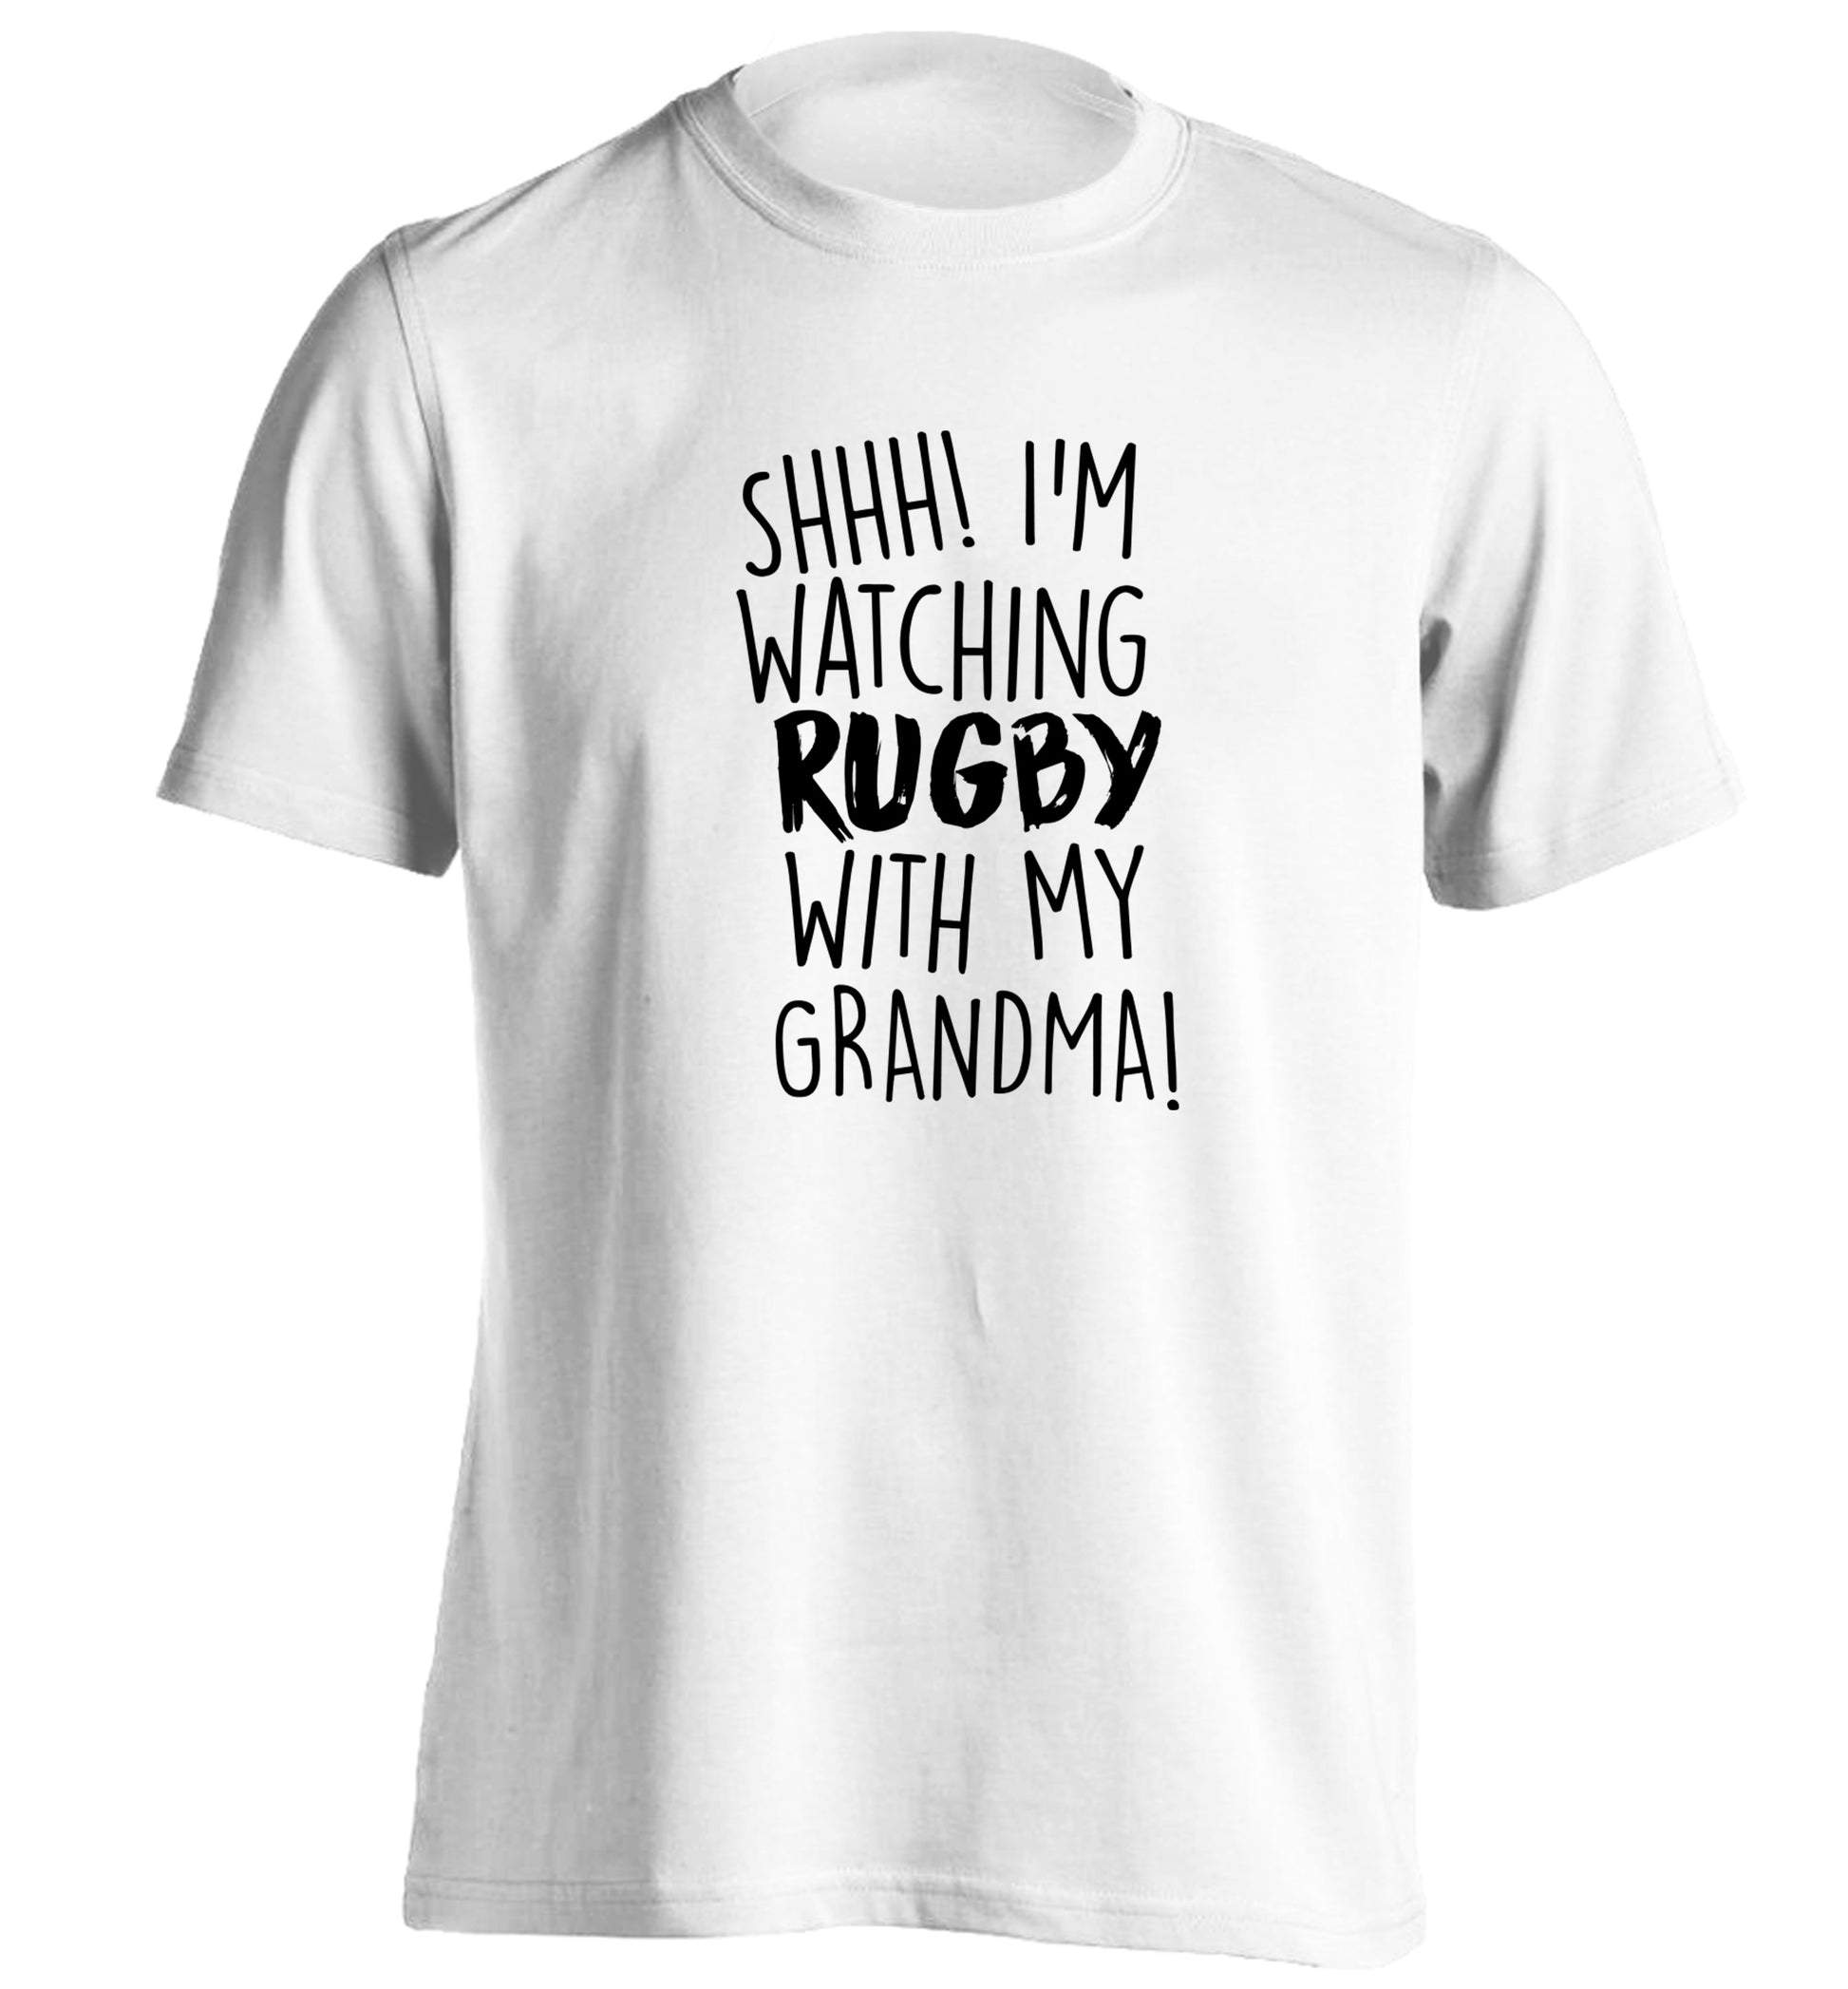 Shh I'm watching rugby with my grandma adults unisex white Tshirt 2XL